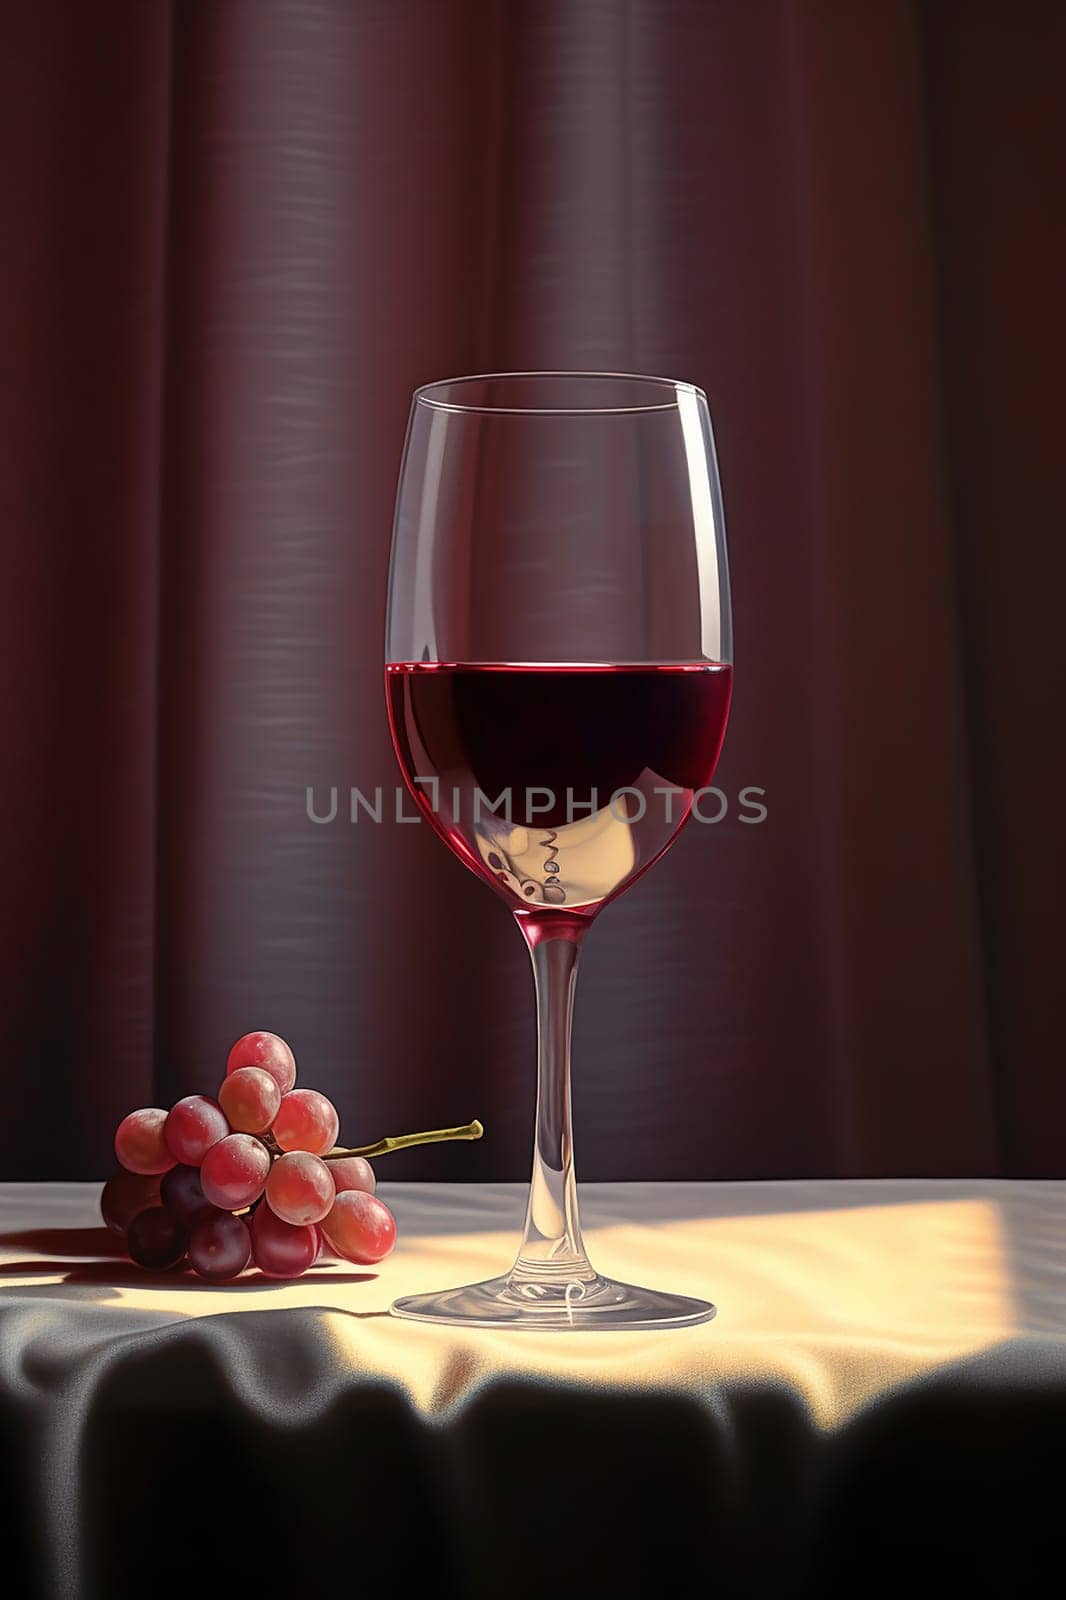 A glass of red wine beside a cluster of grapes on a table